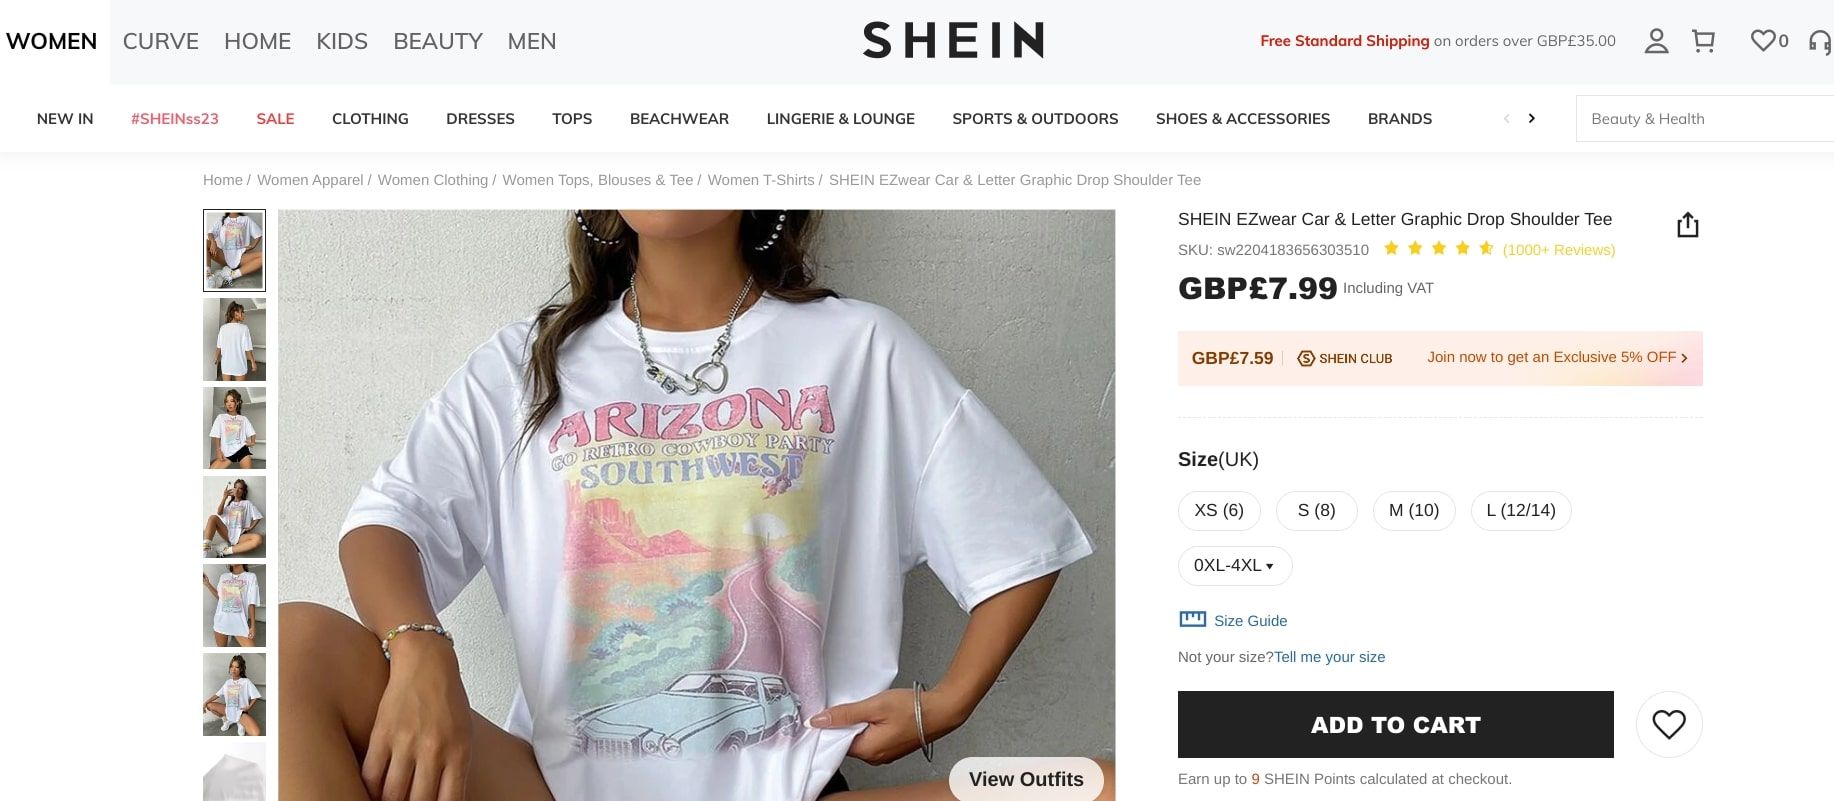 screenshot of shein website product page